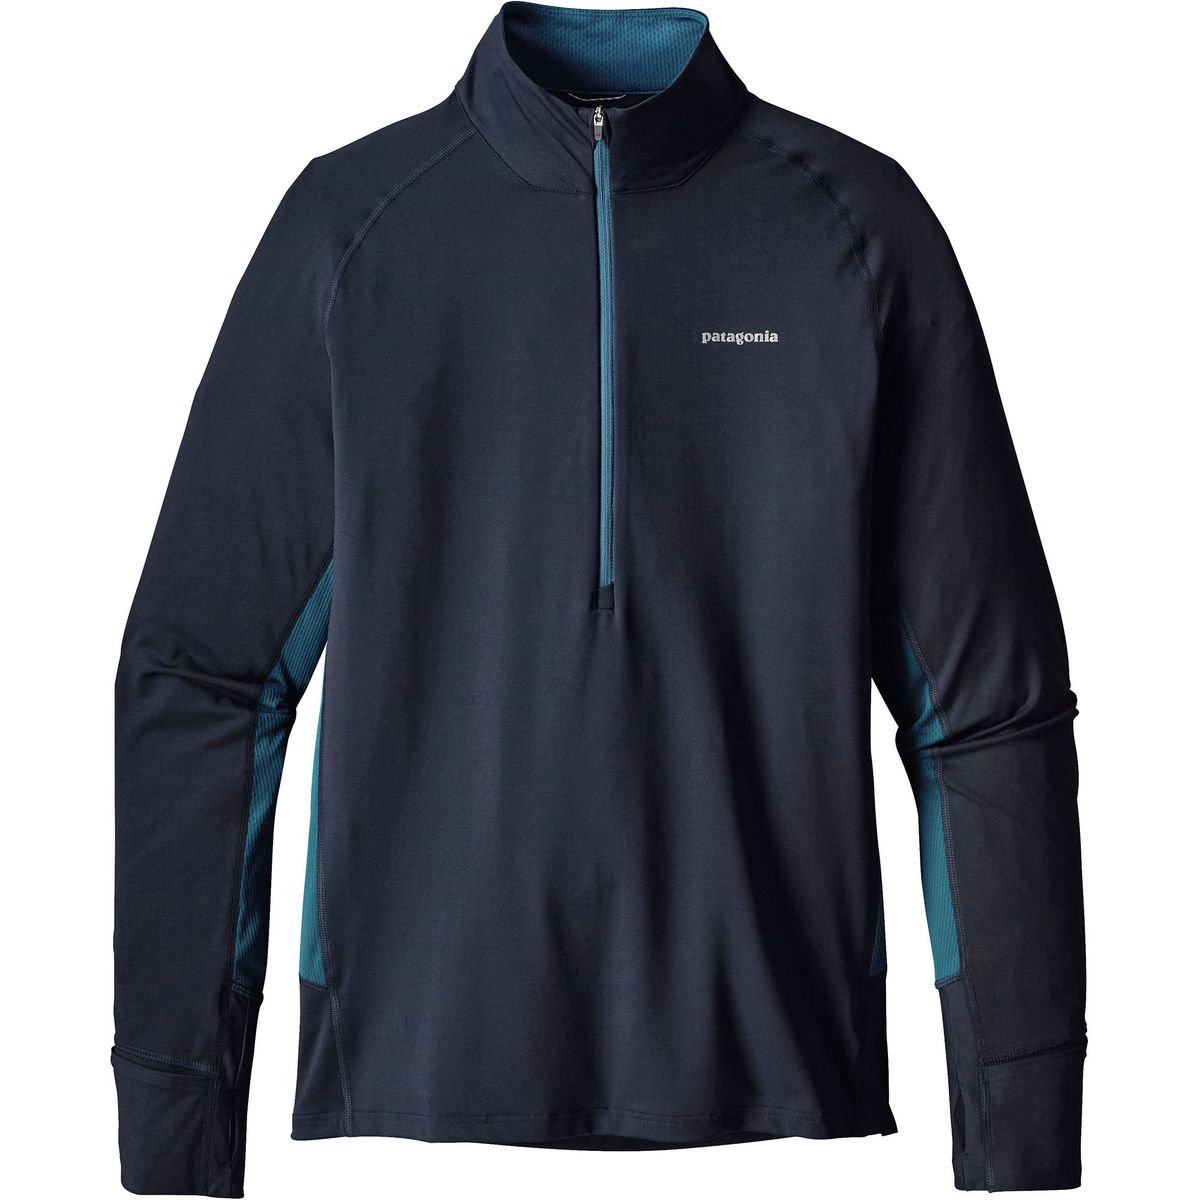 Patagonia All Weather Zip Neck Long Sleeve Shirt Mens